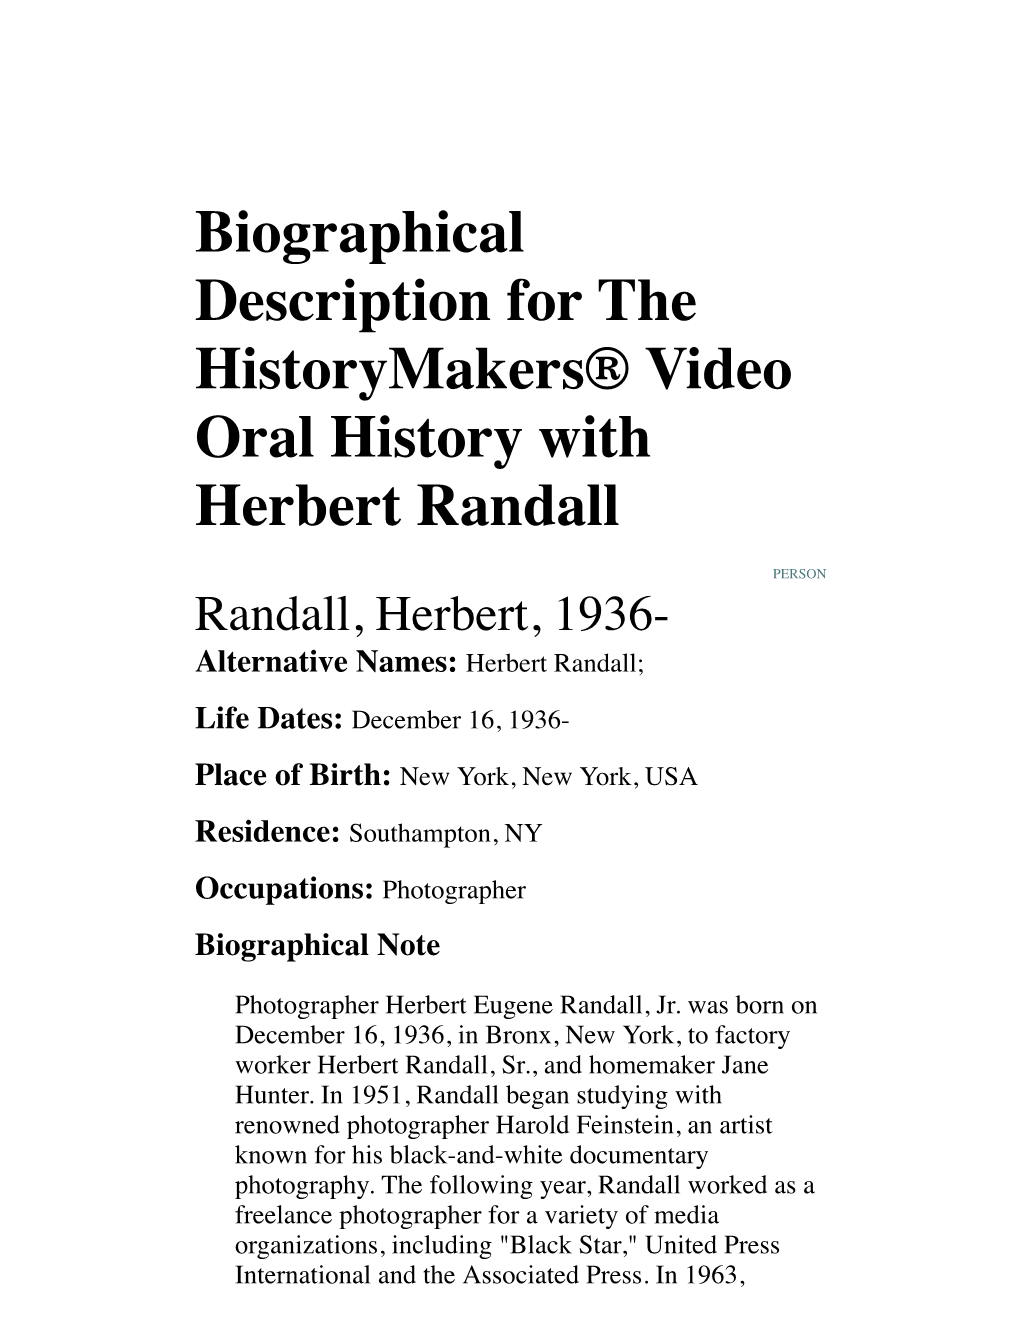 Biographical Description for the Historymakers® Video Oral History with Herbert Randall